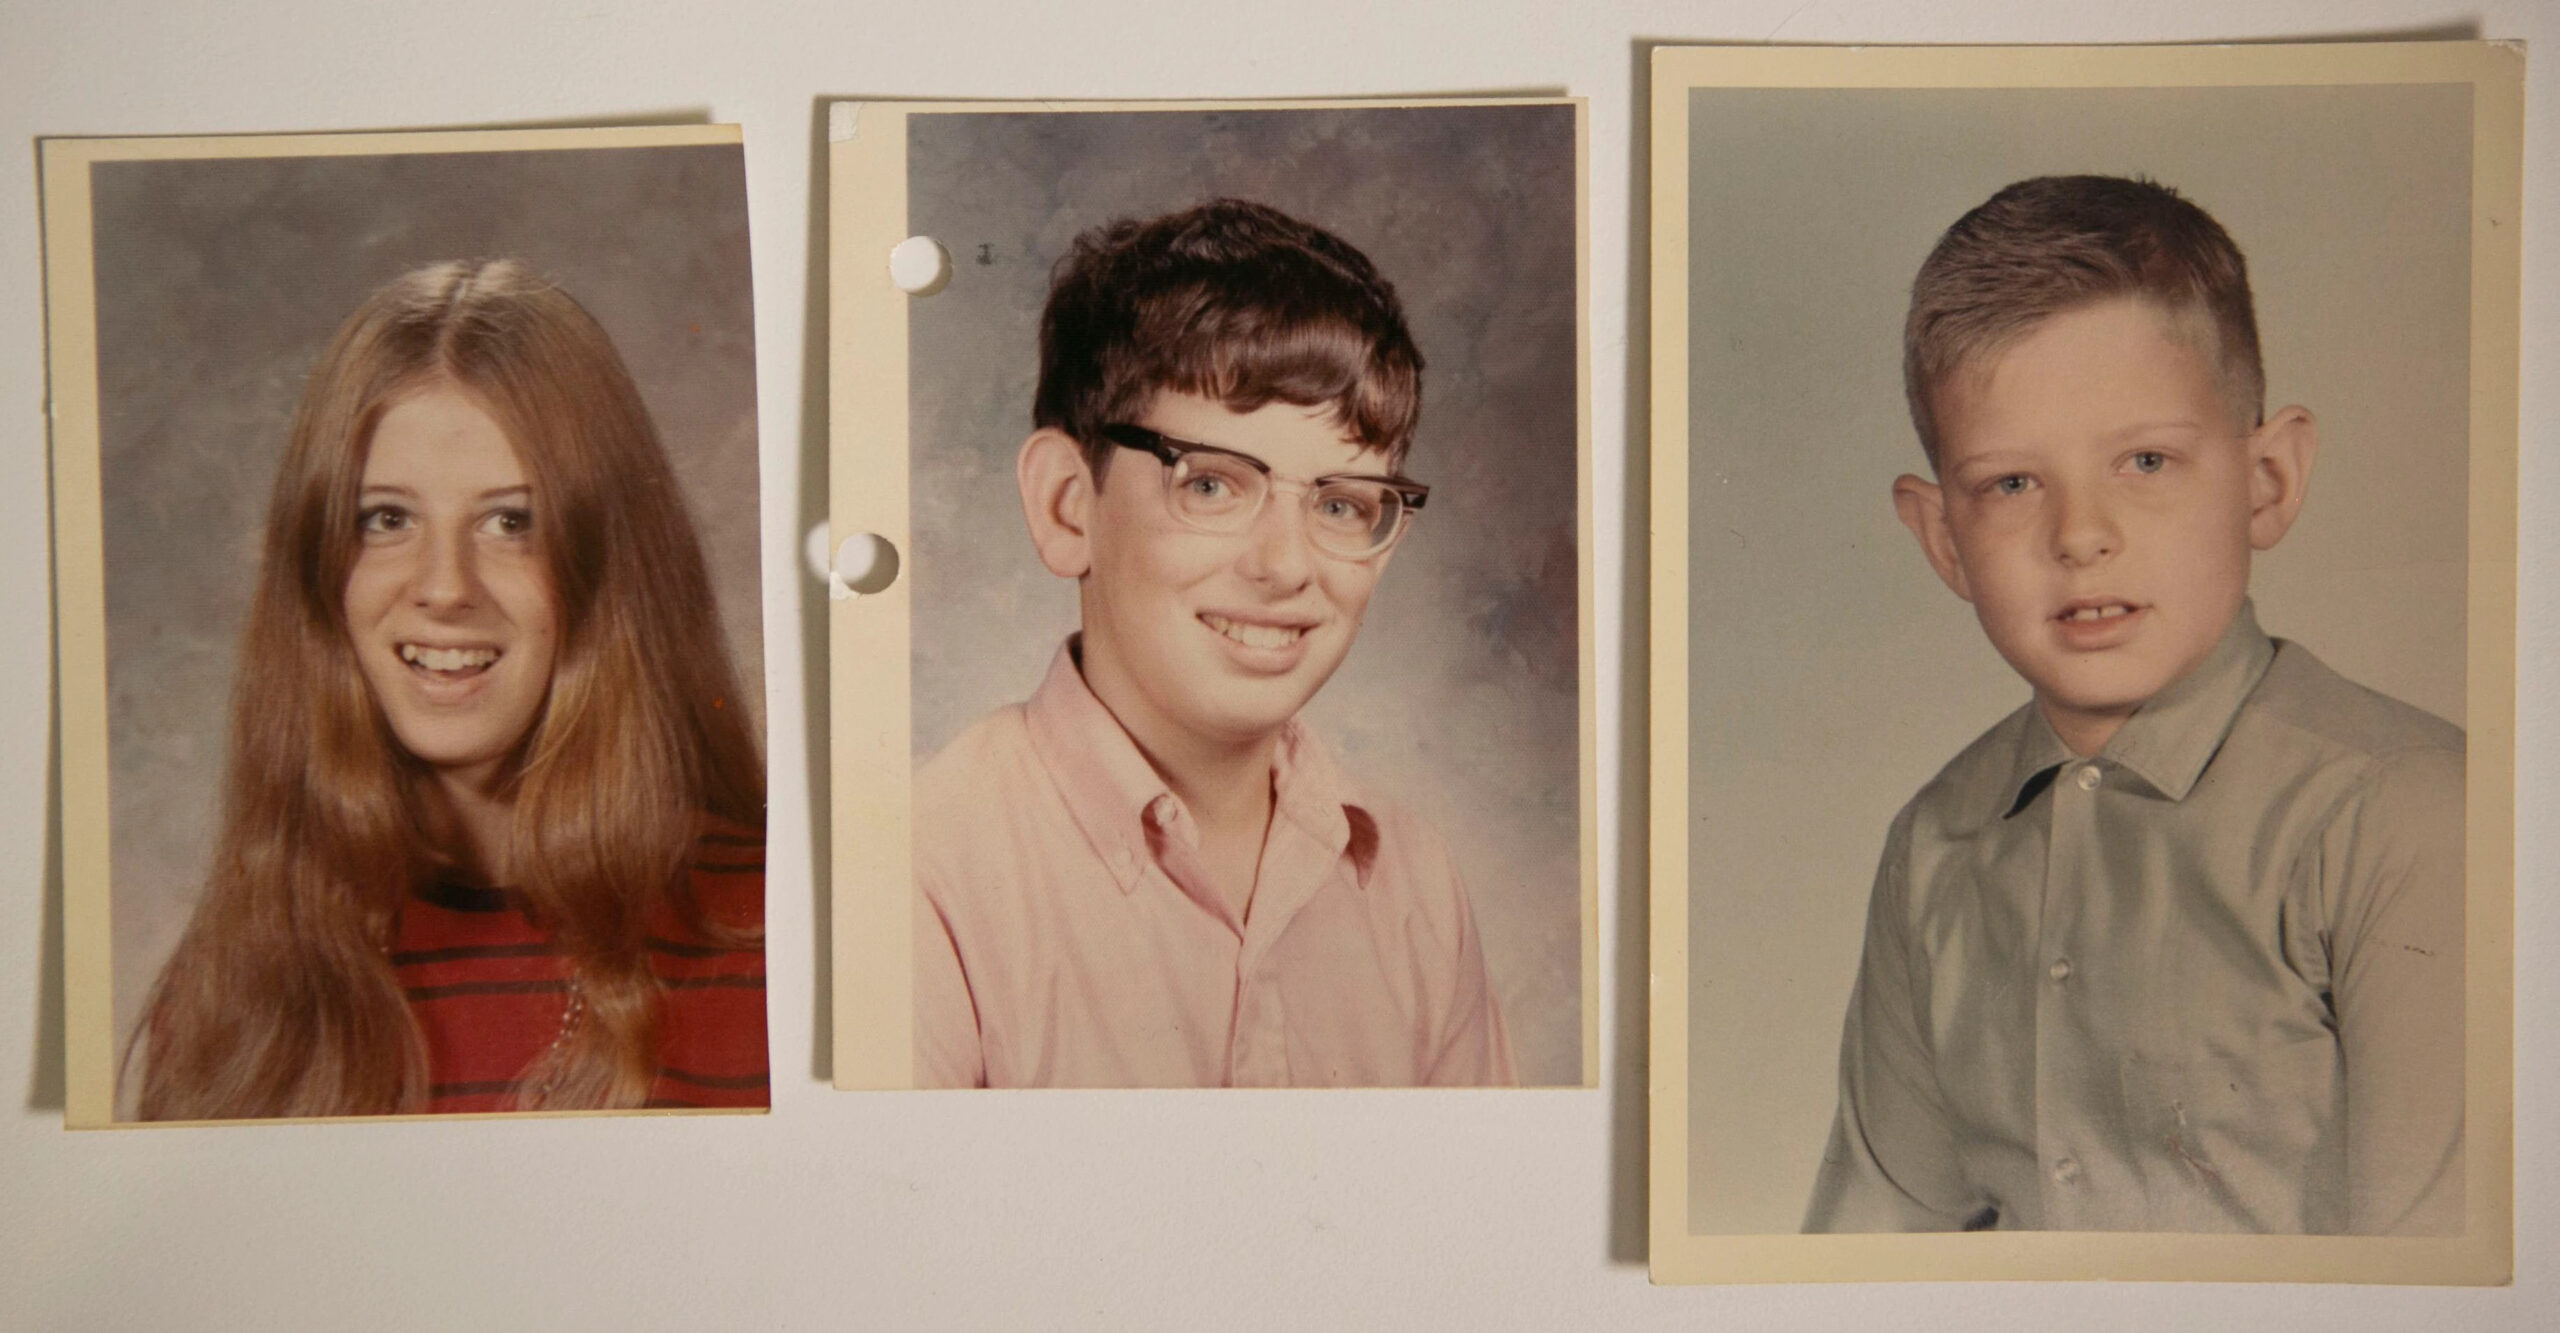 School photos of Patty, John Jr. and Fred List.